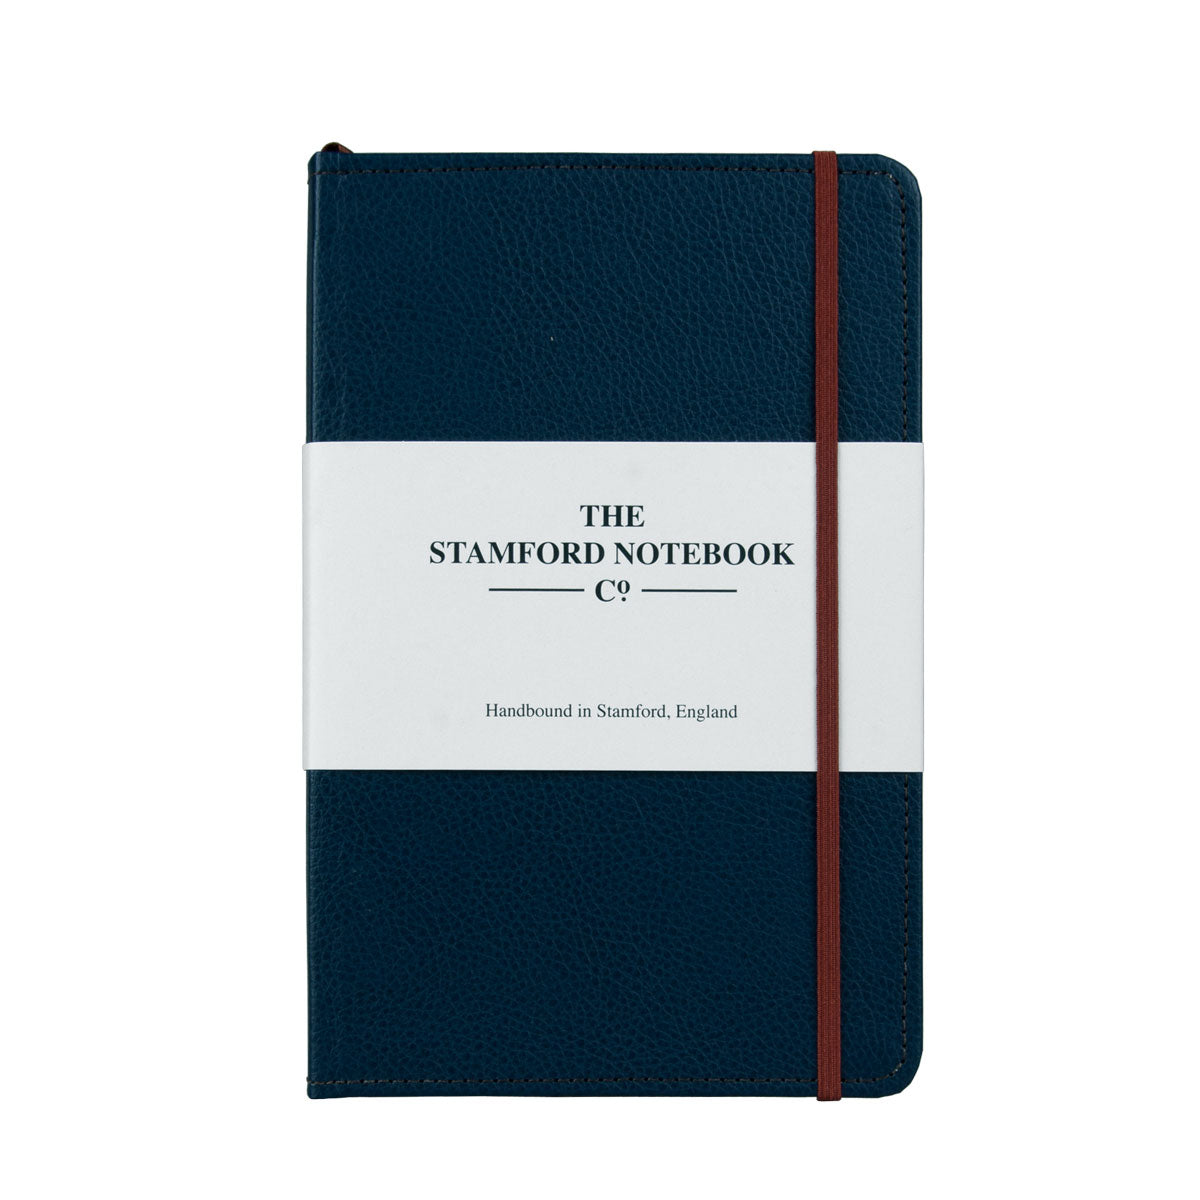 Marine Blue leather notebook with brown stitching